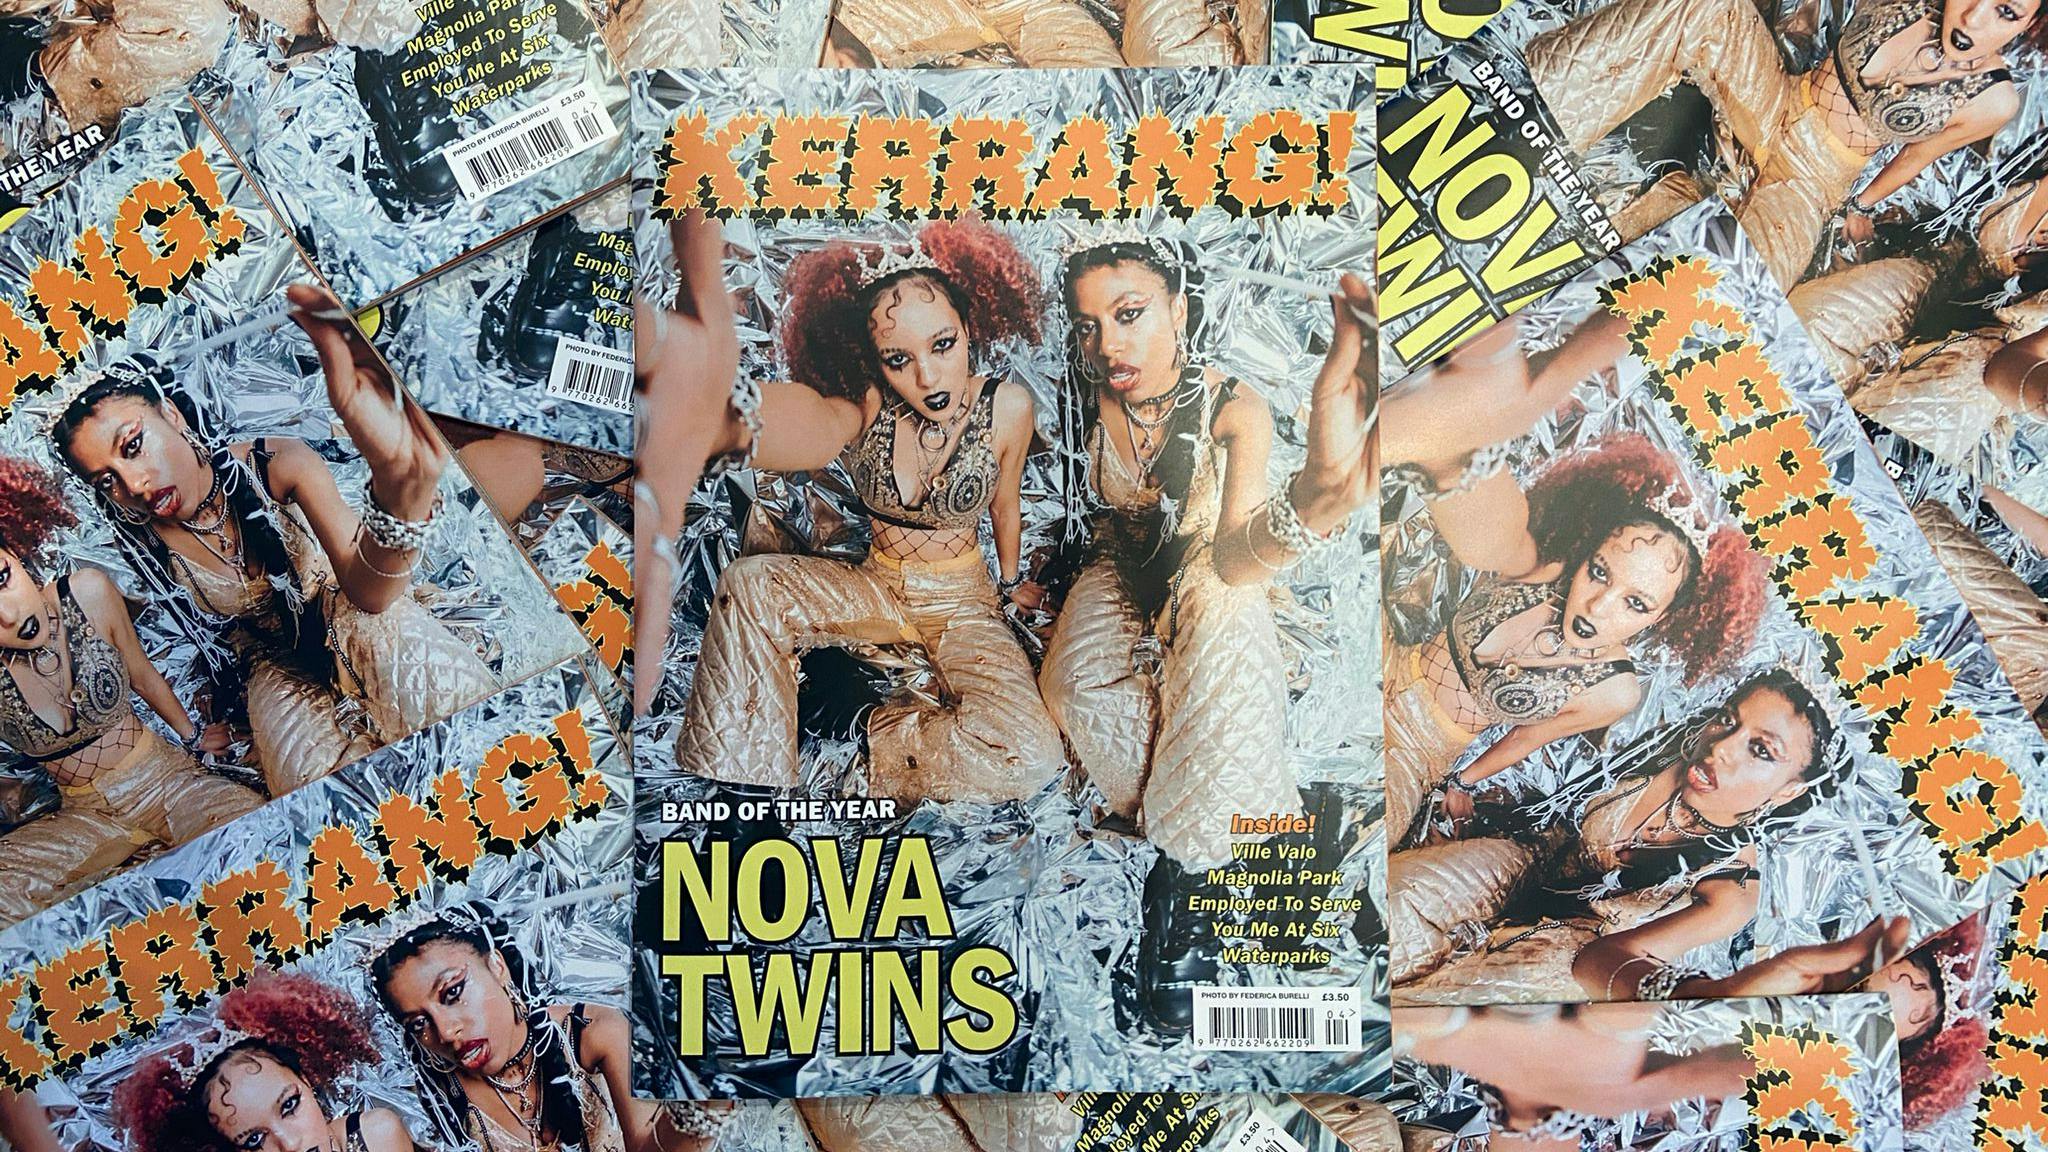 Nova Twins are officially the band of the year – only in the new issue of Kerrang!